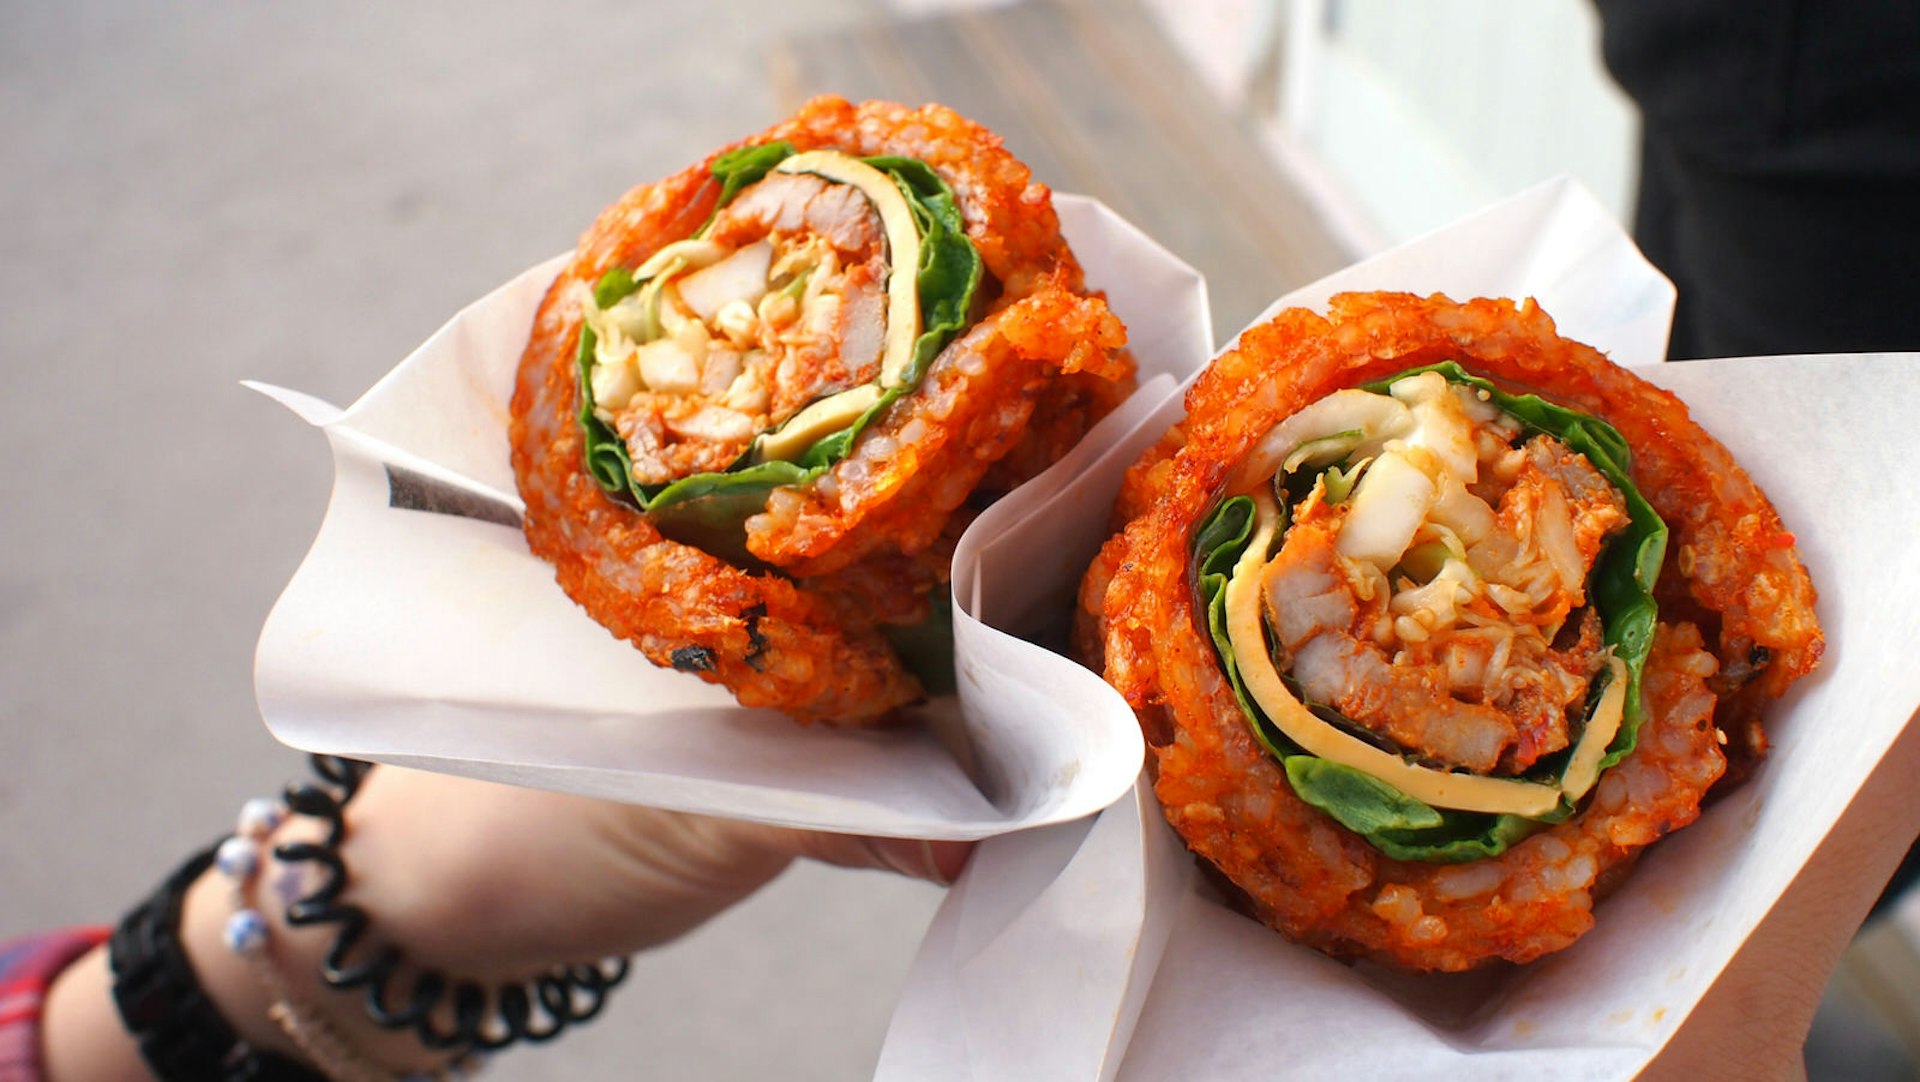 Bibimbap waffle is one of famous street food in Jeonju Hanok village, South Korea. It is composed of spicy rice rolled around a filling - pieces of meat, vegetables, cheese, and rice paper. A woman wearing a bracelet is holding it in her hands.